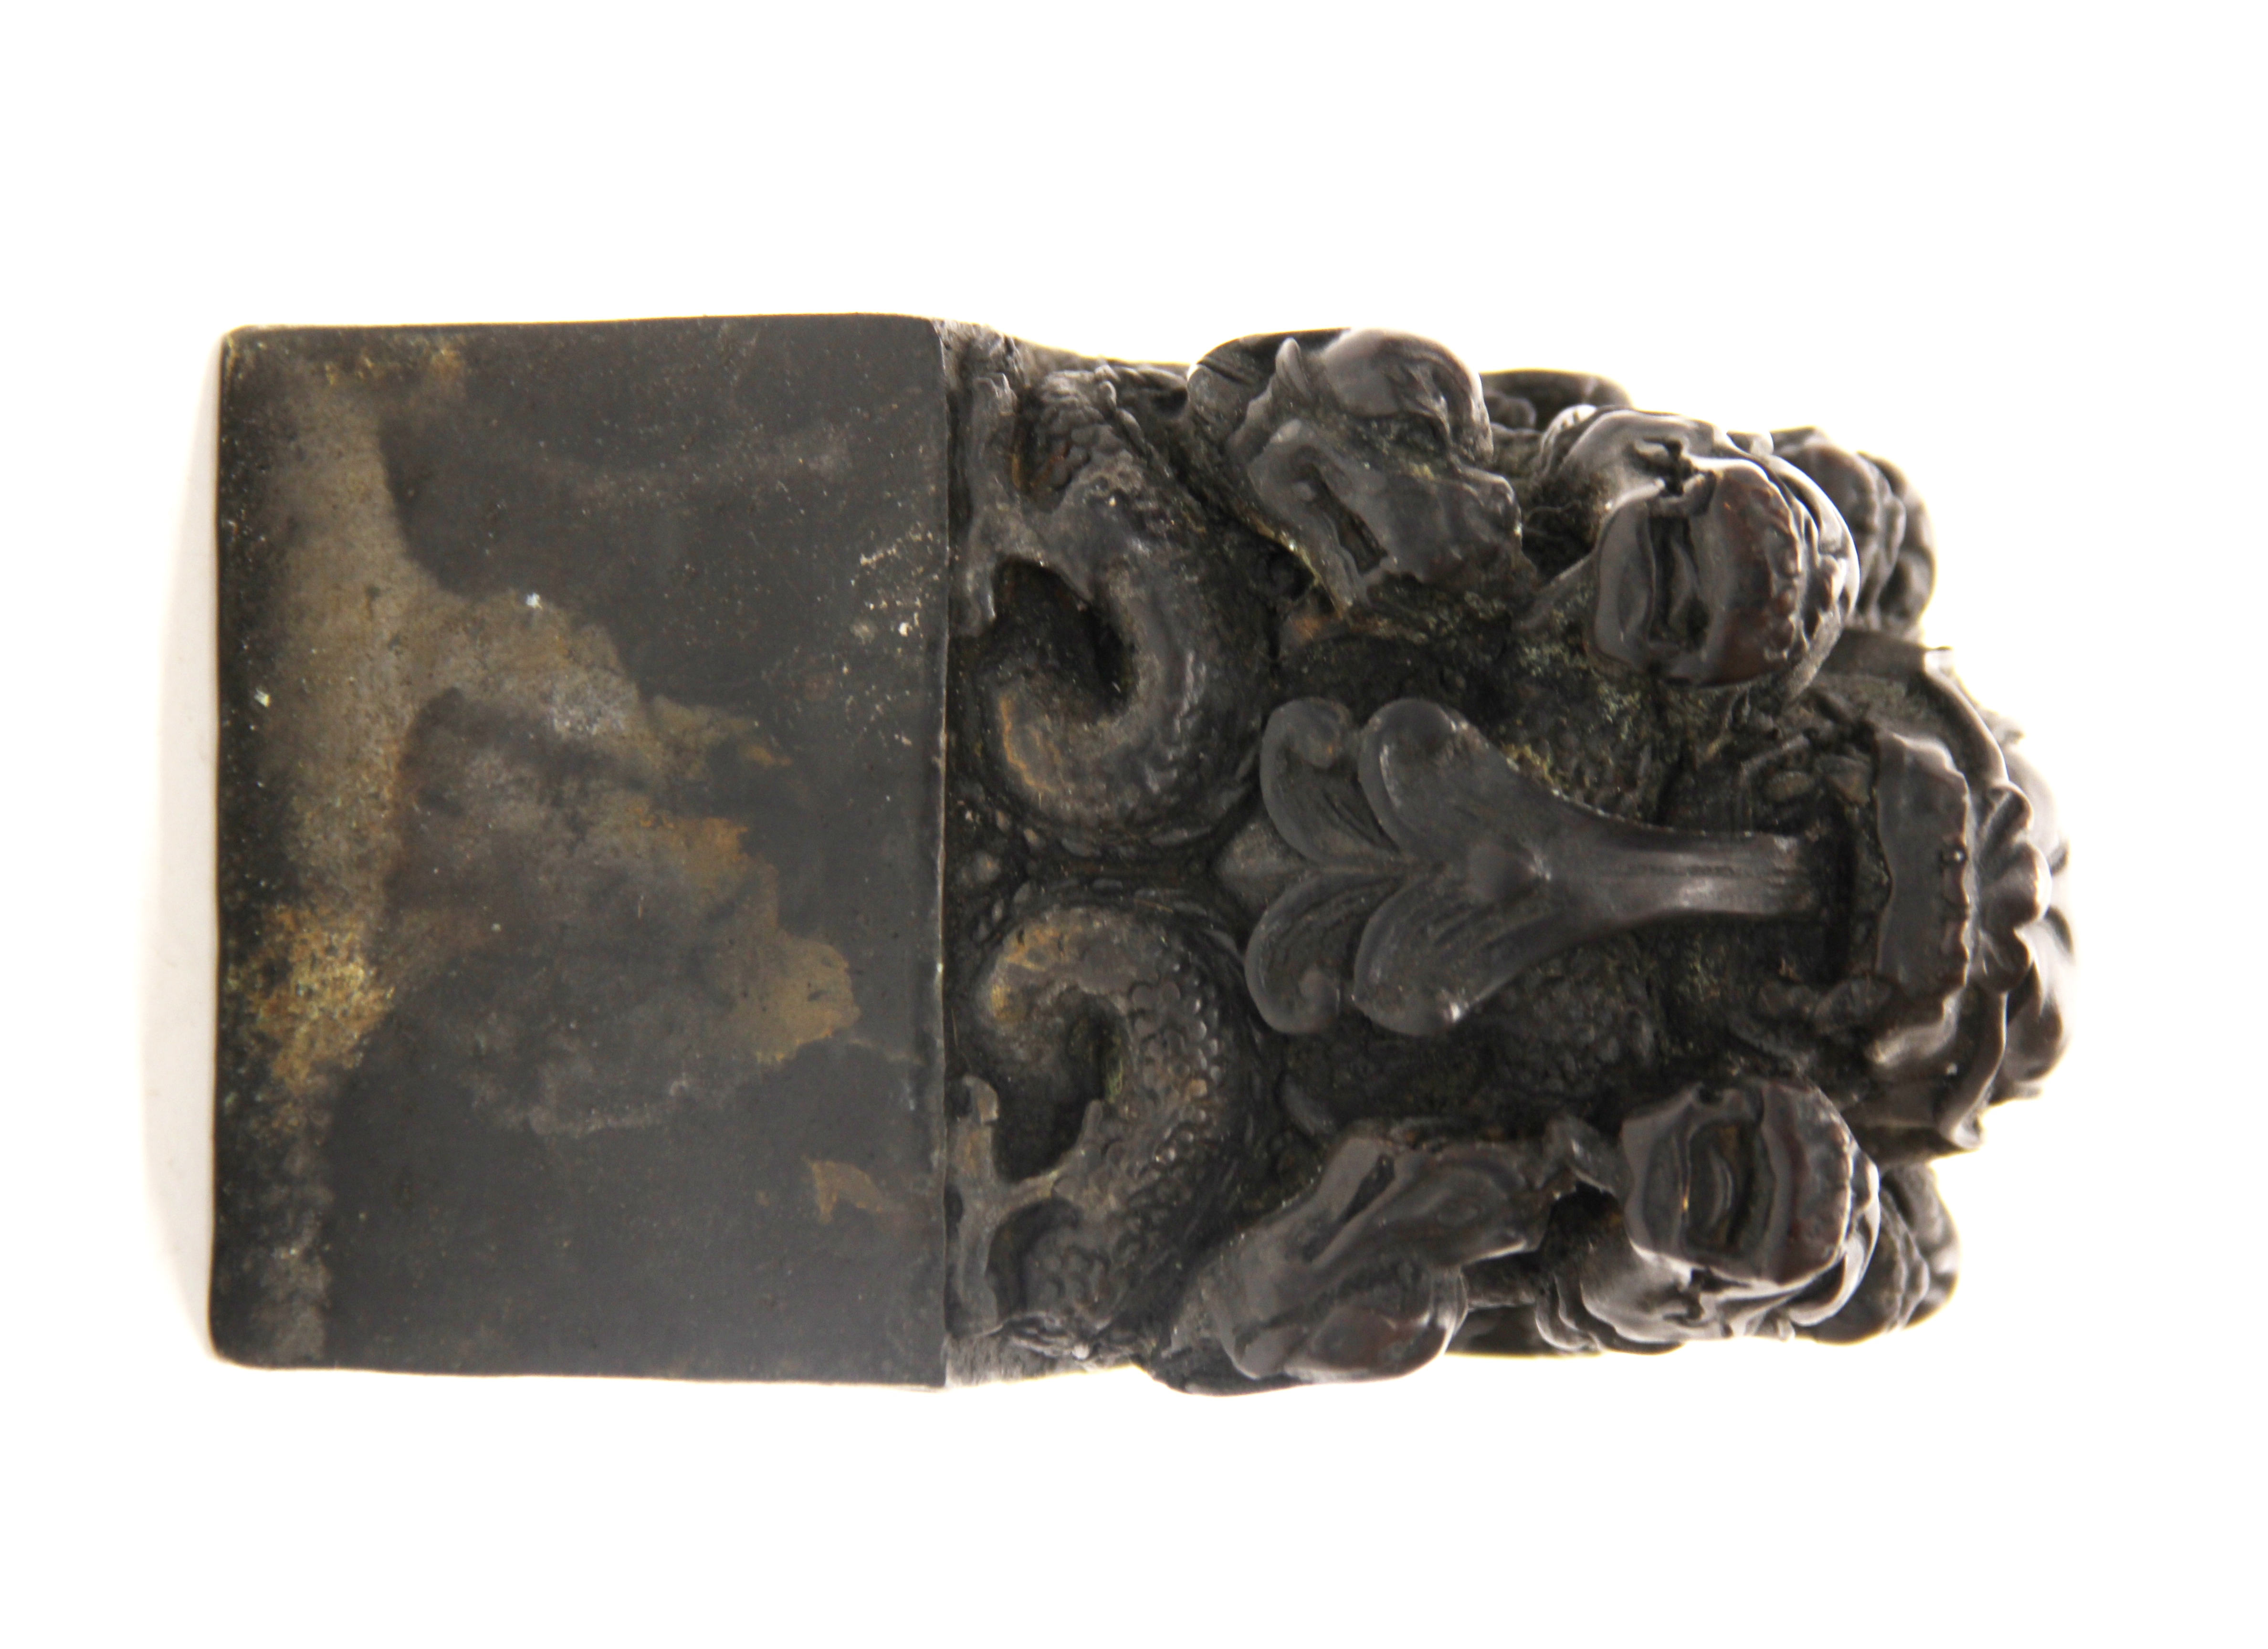 A heavy Chinese cast bronze scholar's seal decorated with dragons, H. 14cm.